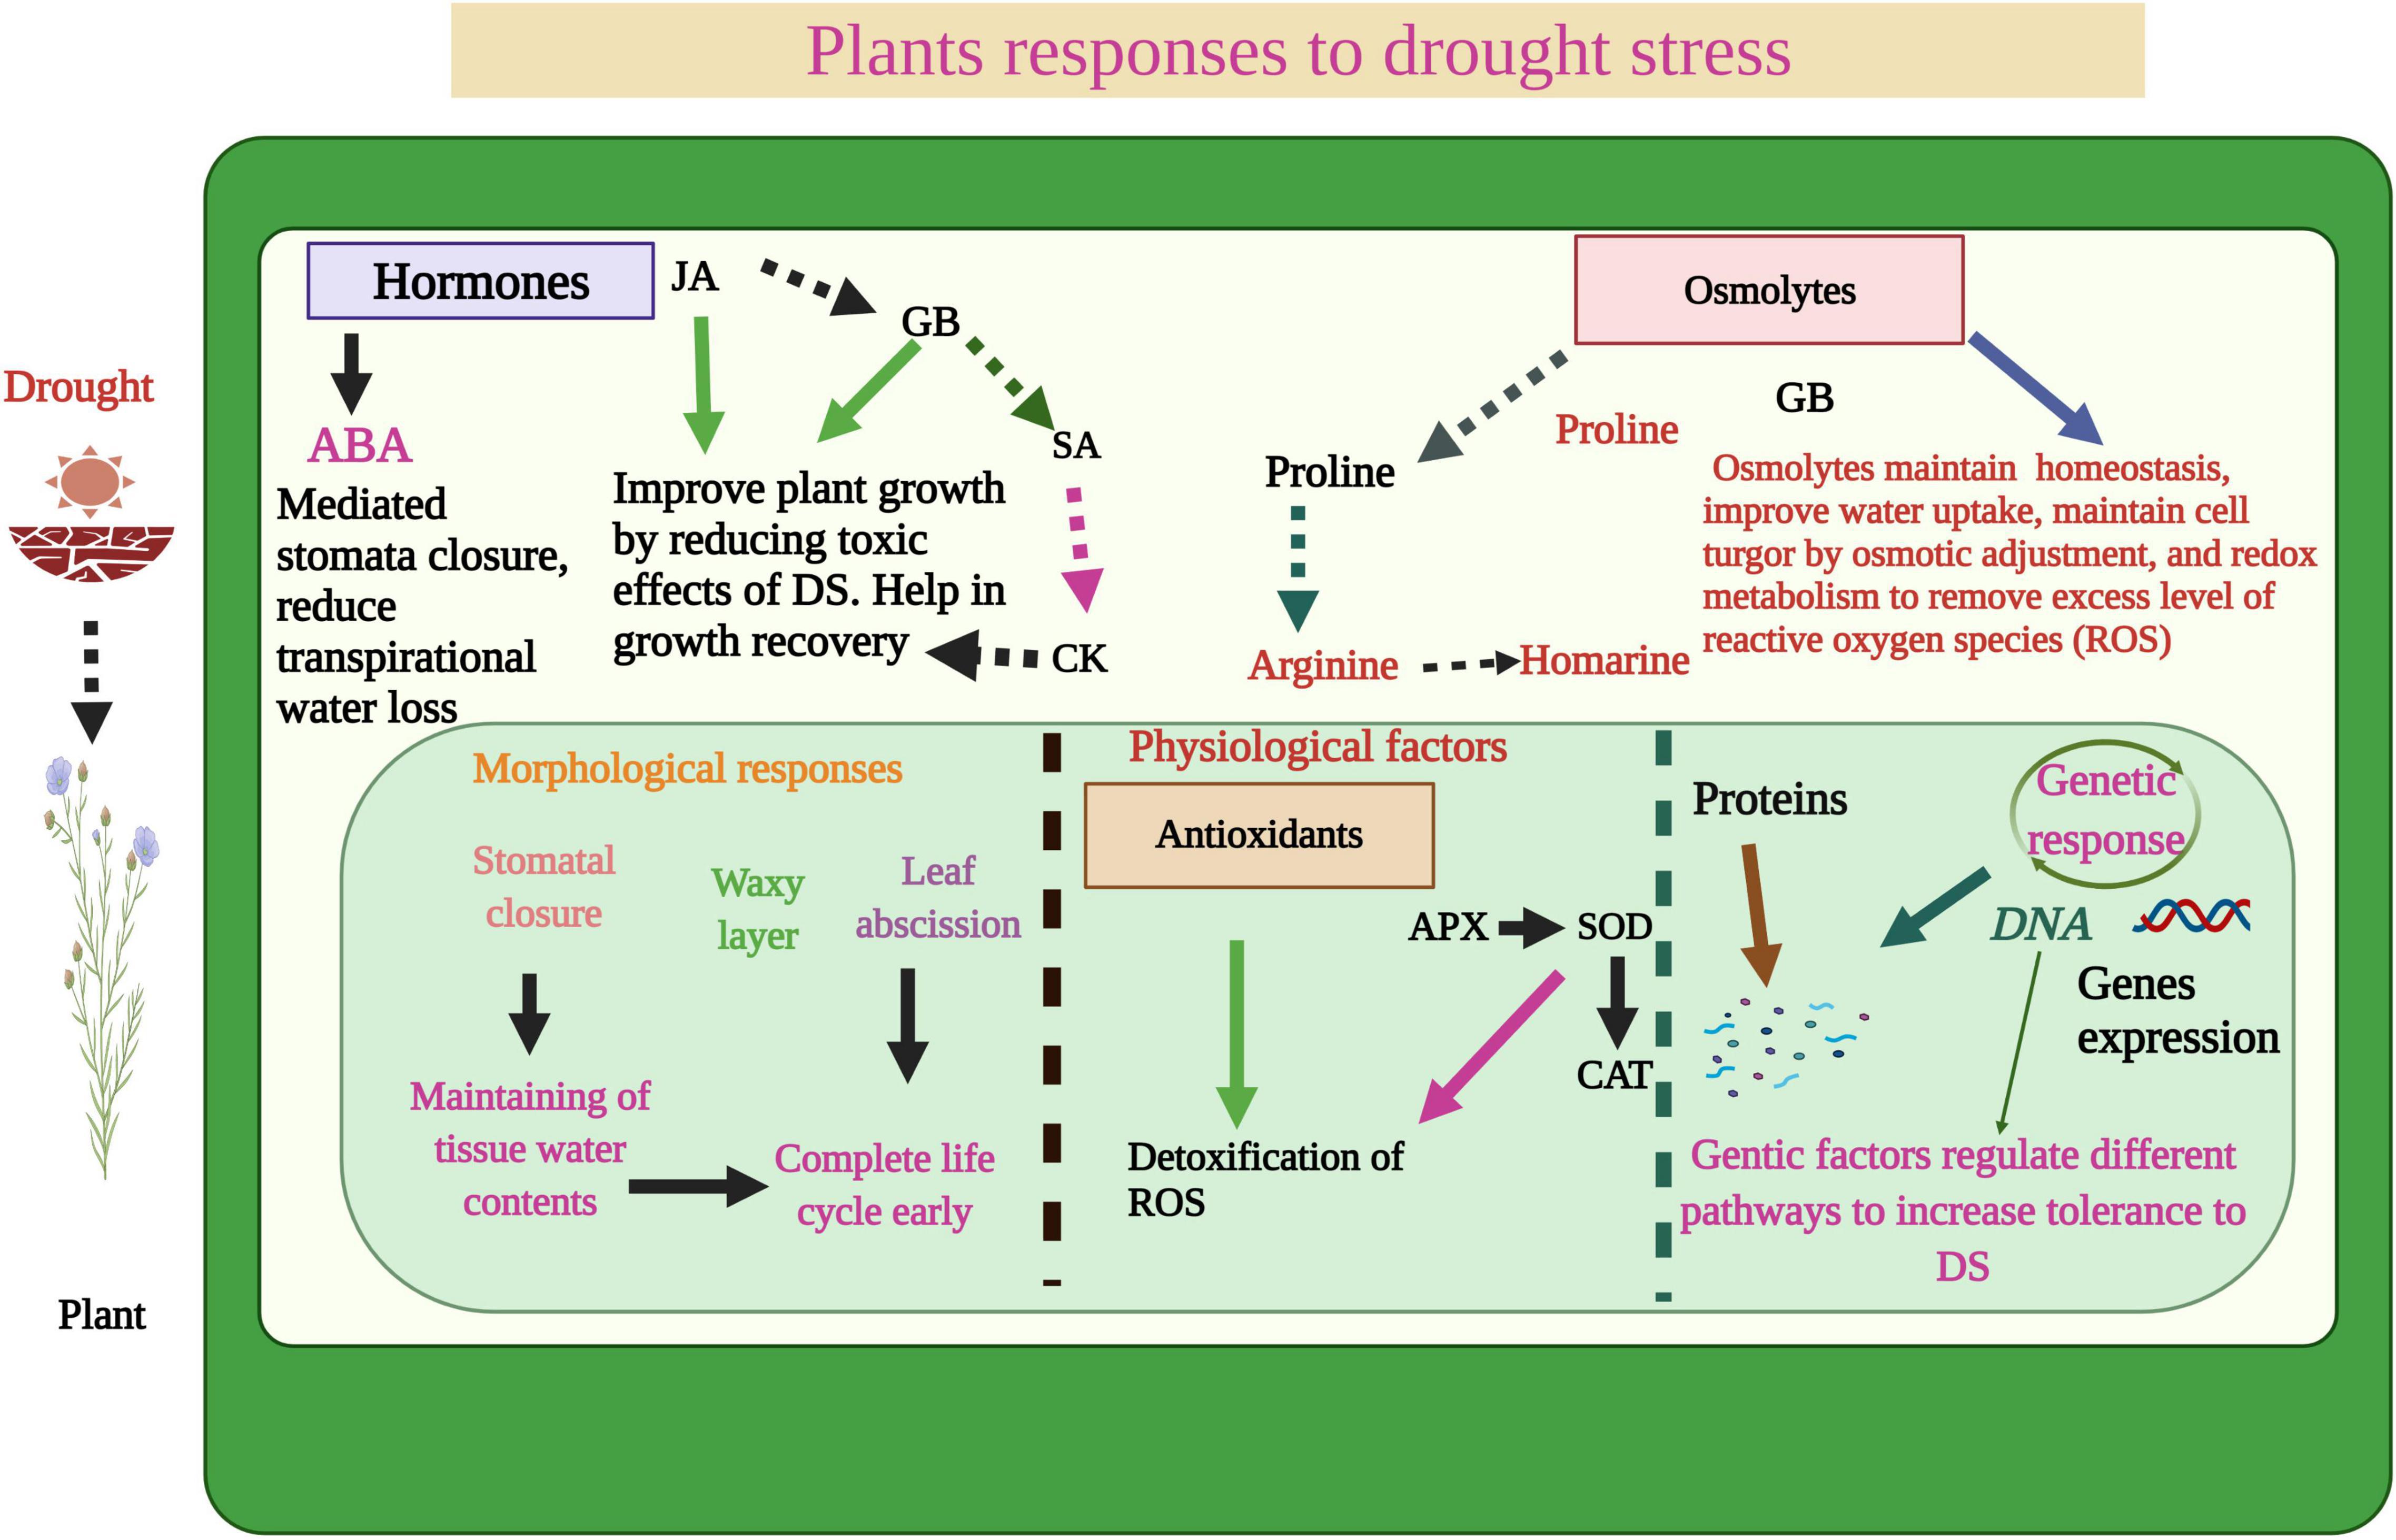 Bioengineering Techniques to Improve Nitrogen Transformation and  Utilization: Implications for Nitrogen Use Efficiency and Future  Sustainable Crop Production